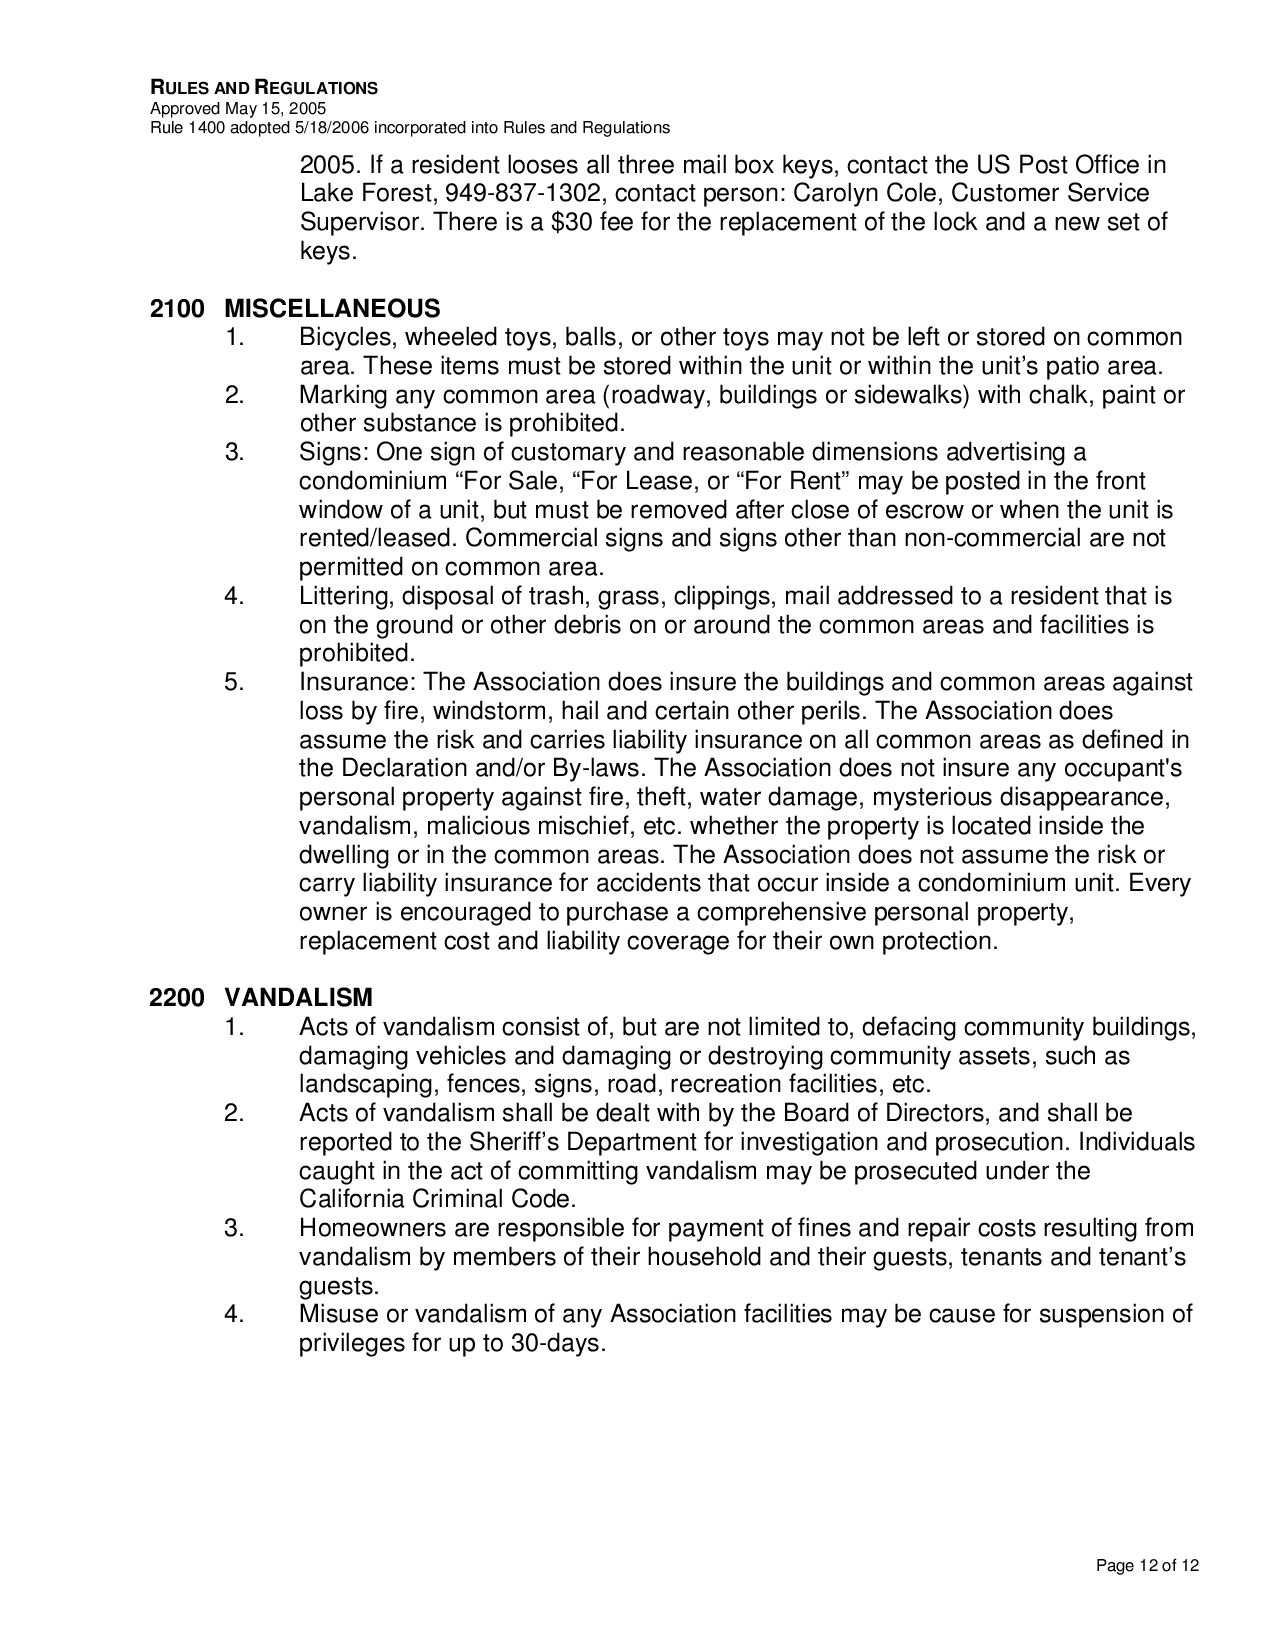 Page 12 of the HOA Rules and Regulations